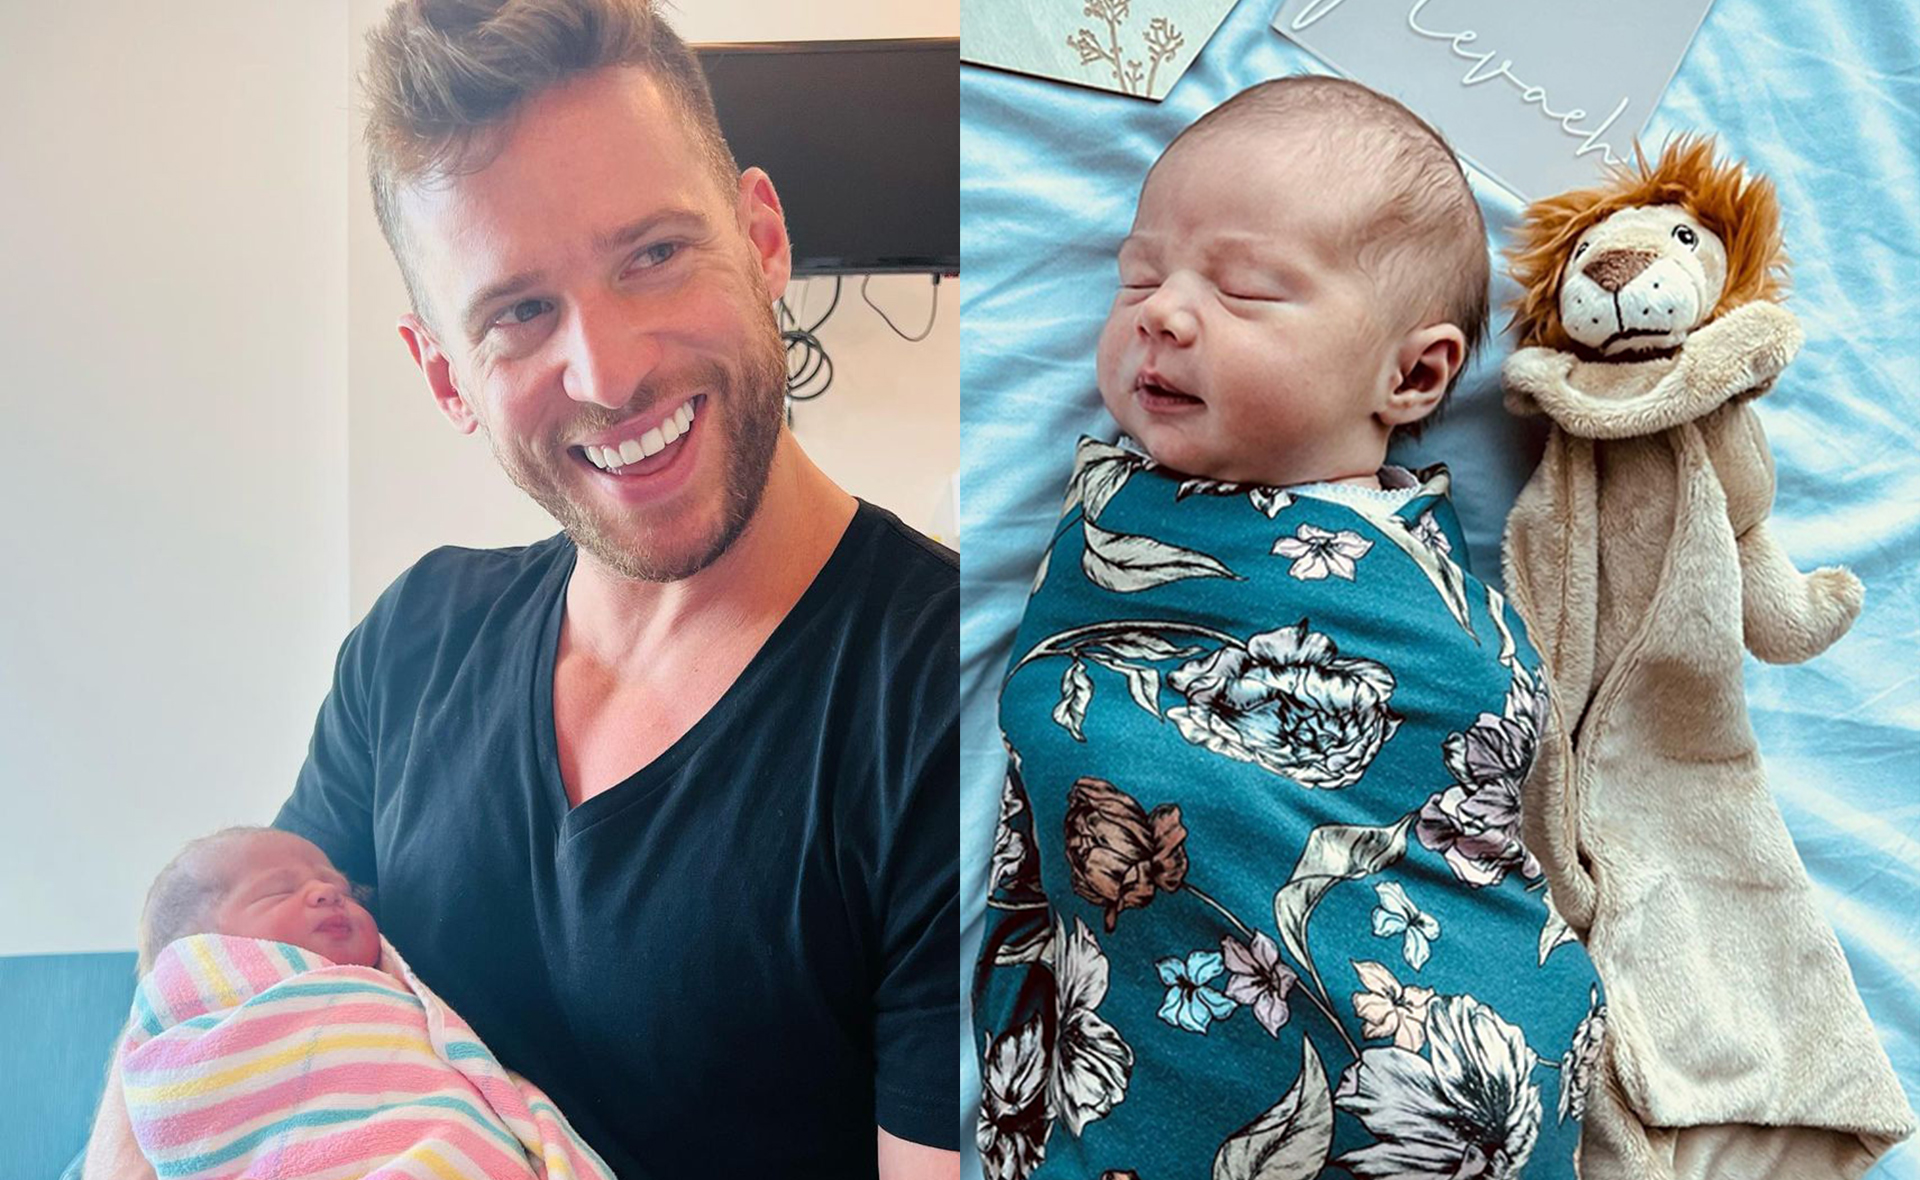 Home and Away alum Dan Ewing and his fiancée Kat Risteska welcome their first baby together